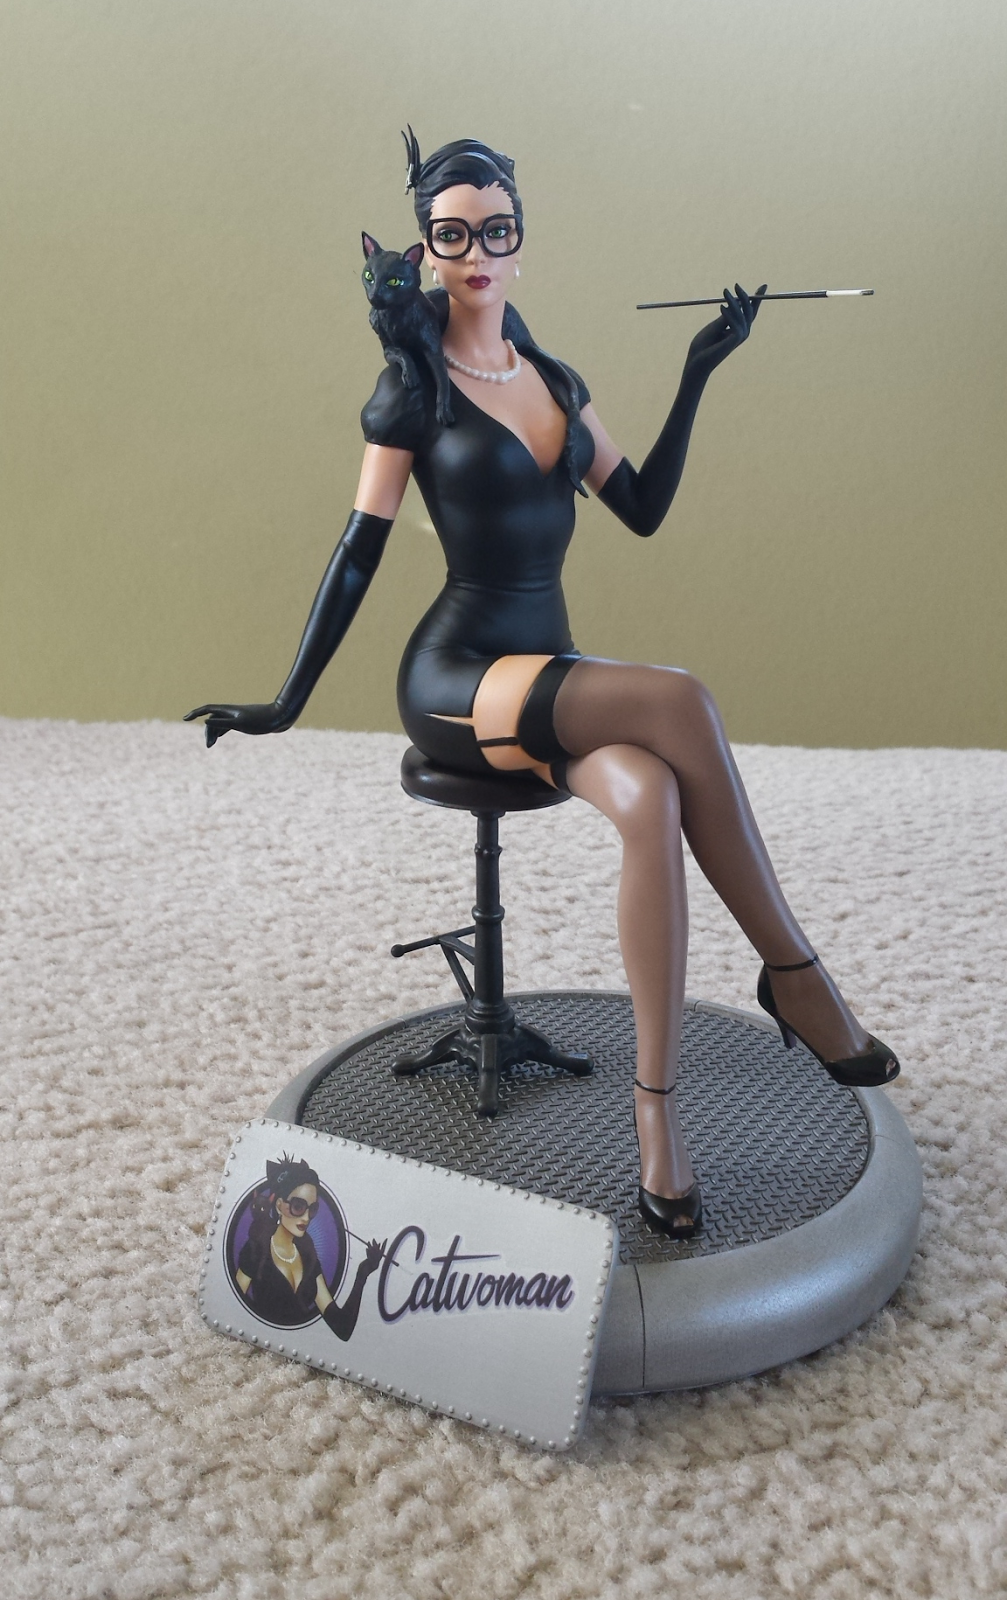 catwoman bombshell statue